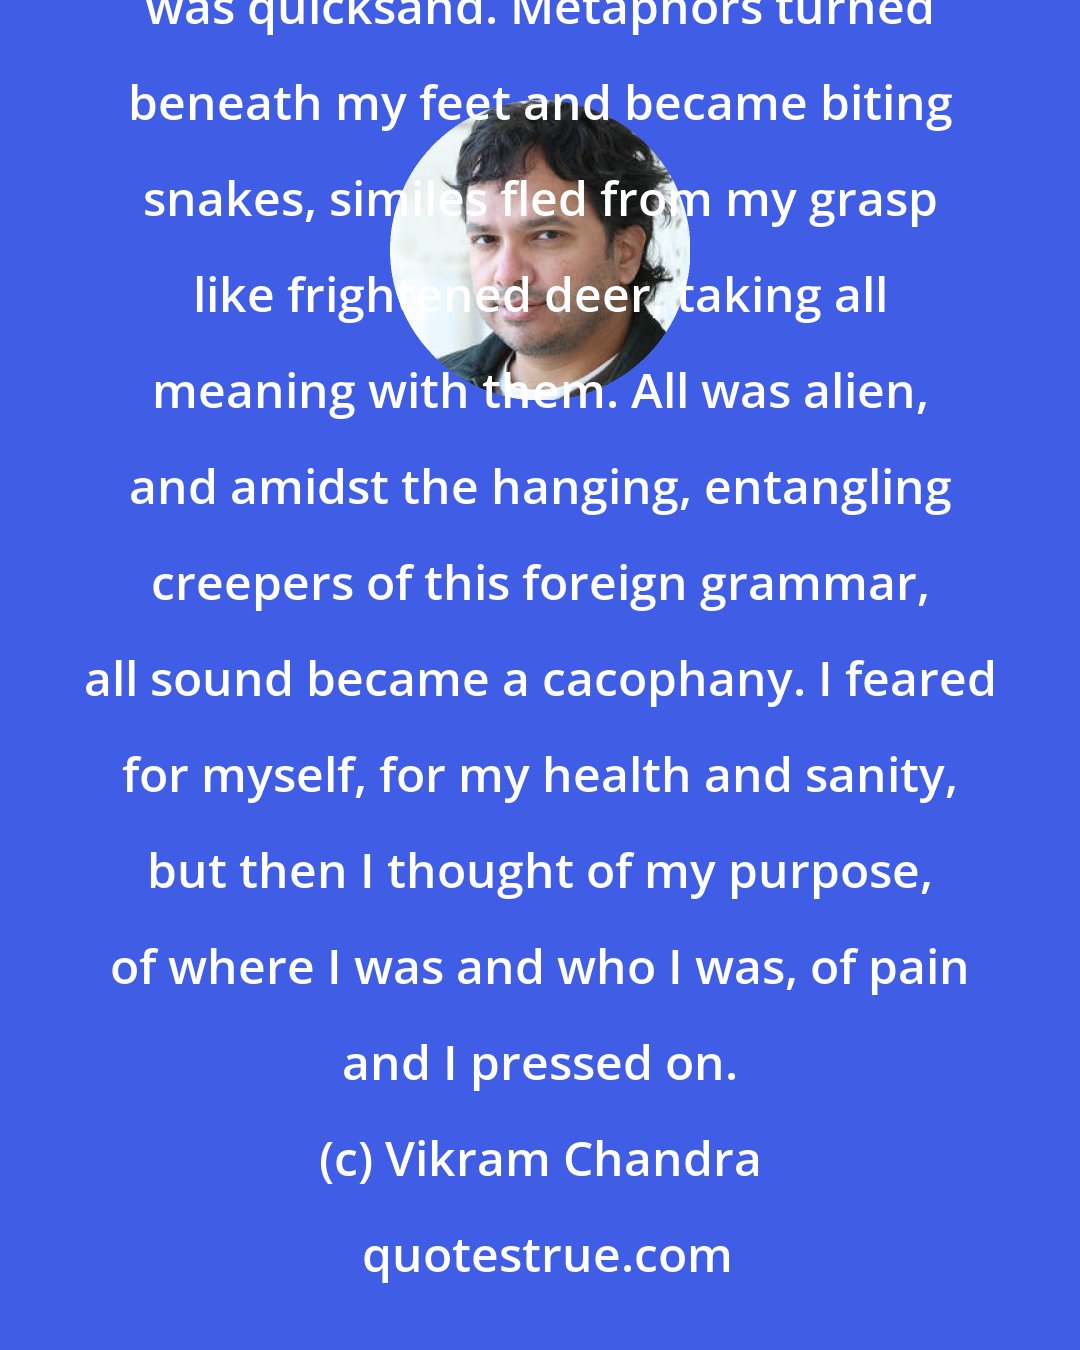 Vikram Chandra: And so I began to read,' Sorkar said. 'And at first the complete works were like a jungle, the language was quicksand. Metaphors turned beneath my feet and became biting snakes, similes fled from my grasp like frightened deer, taking all meaning with them. All was alien, and amidst the hanging, entangling creepers of this foreign grammar, all sound became a cacophany. I feared for myself, for my health and sanity, but then I thought of my purpose, of where I was and who I was, of pain and I pressed on.